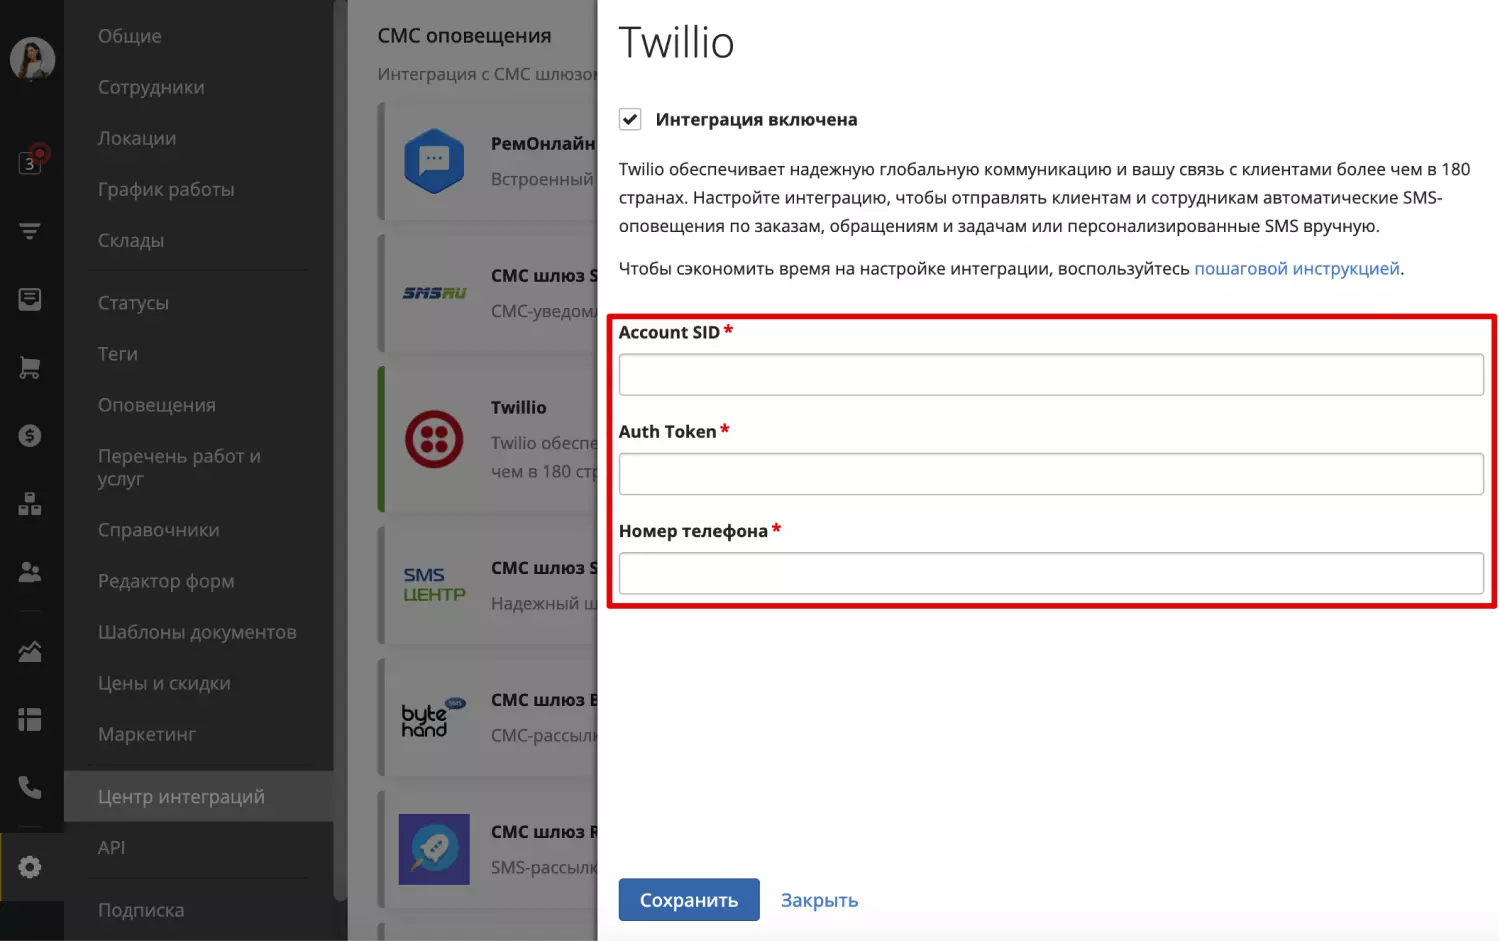 integrations-twilio-fields-ro.png (73 KB)